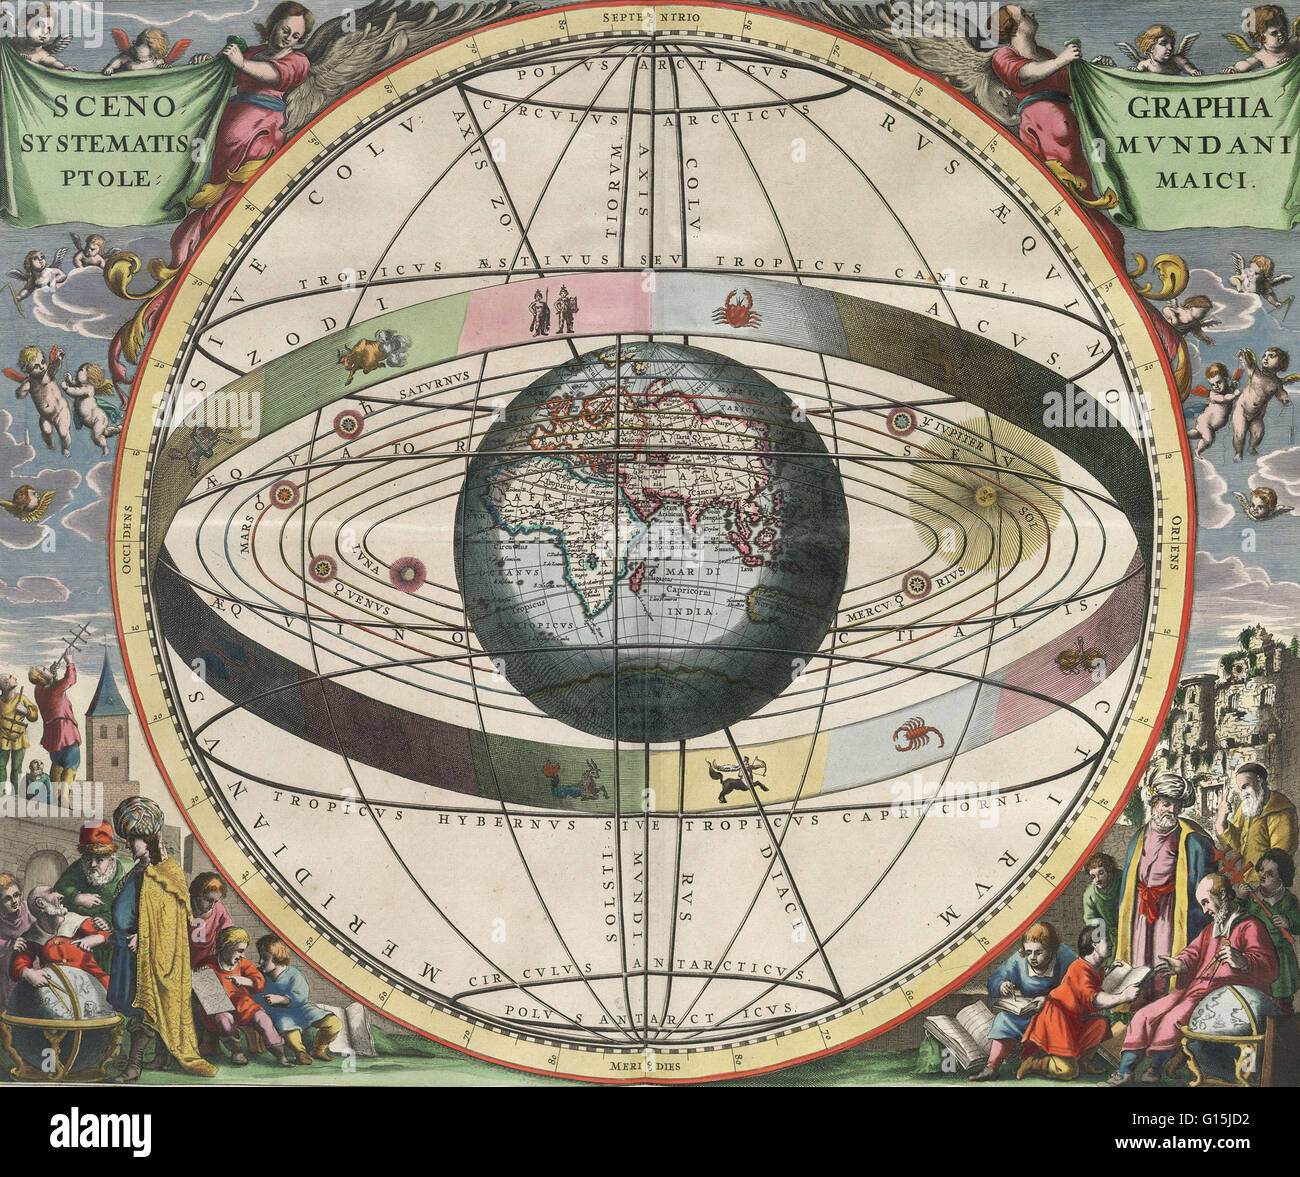 Scenographia Systematis Mvndani Ptolemaici. Scenography of the Ptolemaic cosmography. In astronomy, the geocentric model (also known as geocentrism, or the Ptolemaic system), is the superseded theory that the Earth is the center of the universe, and that Stock Photo